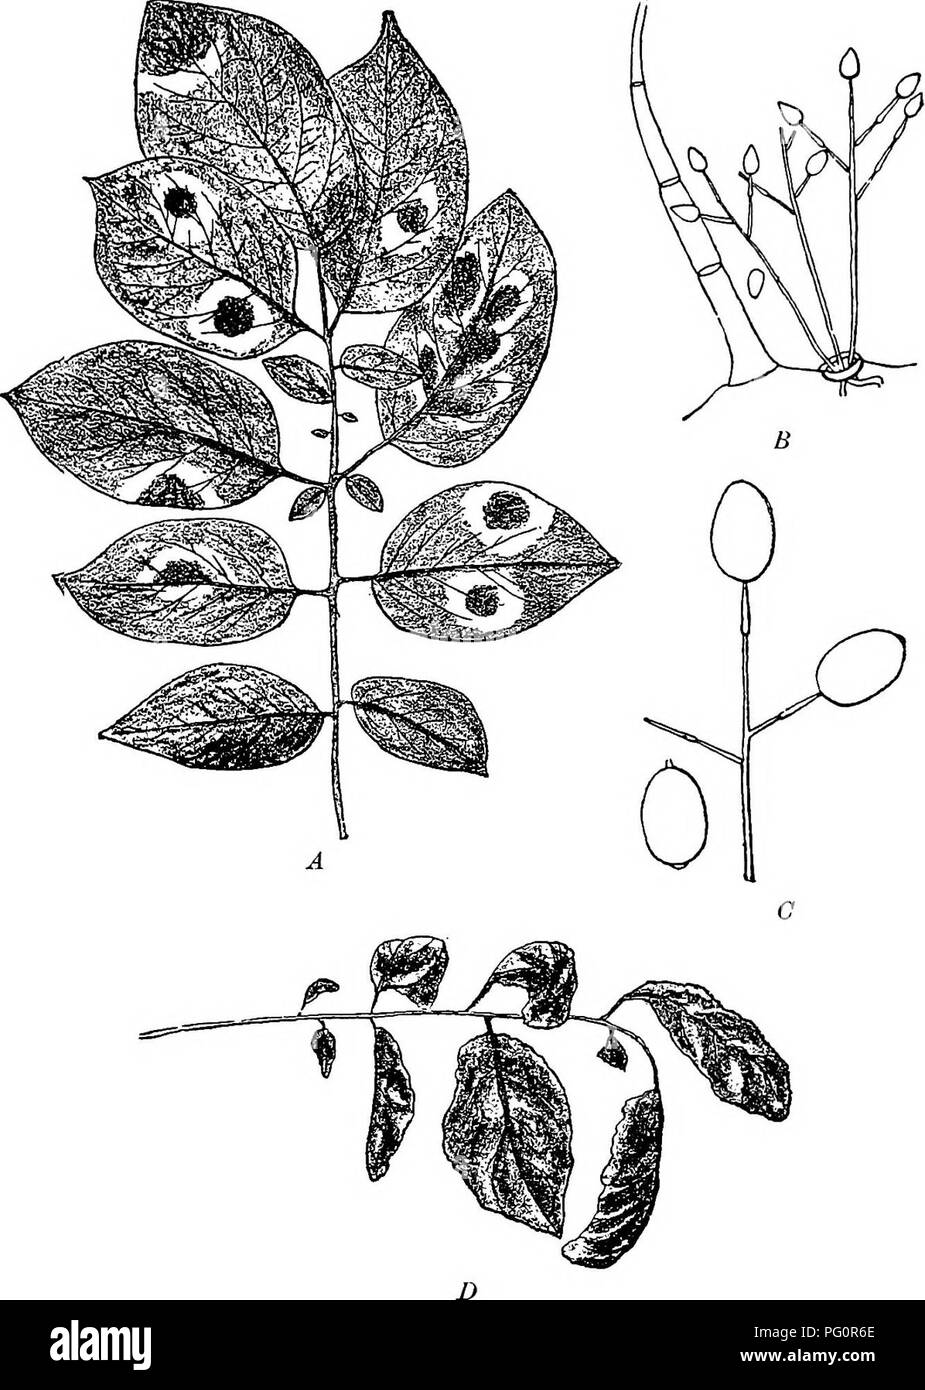 . Diseases of plants induced by cryptogamic parasites : introduction to the study of pathogenic Fungi, slime-Fungi, bacteria, &amp; Algae . Plant diseases; Parasitic plants; Fungi. PHYTOPHTHORA. 121. Fig. 32.—Pkytopkthora infestans. The Potato disease. A, Potato leaf with brown spots and white patches of fuDgi on the lower side. £, Groups of conidio- phores emerging from a stoma close beside a hair of the potato leaf. C, Conidio- phores and conidia, much enlarged. B, Leaf of potato much shrivelled up and brown, as in the later stages of the disea-se. (y. Tubeuf del.). Please note that these im Stock Photo